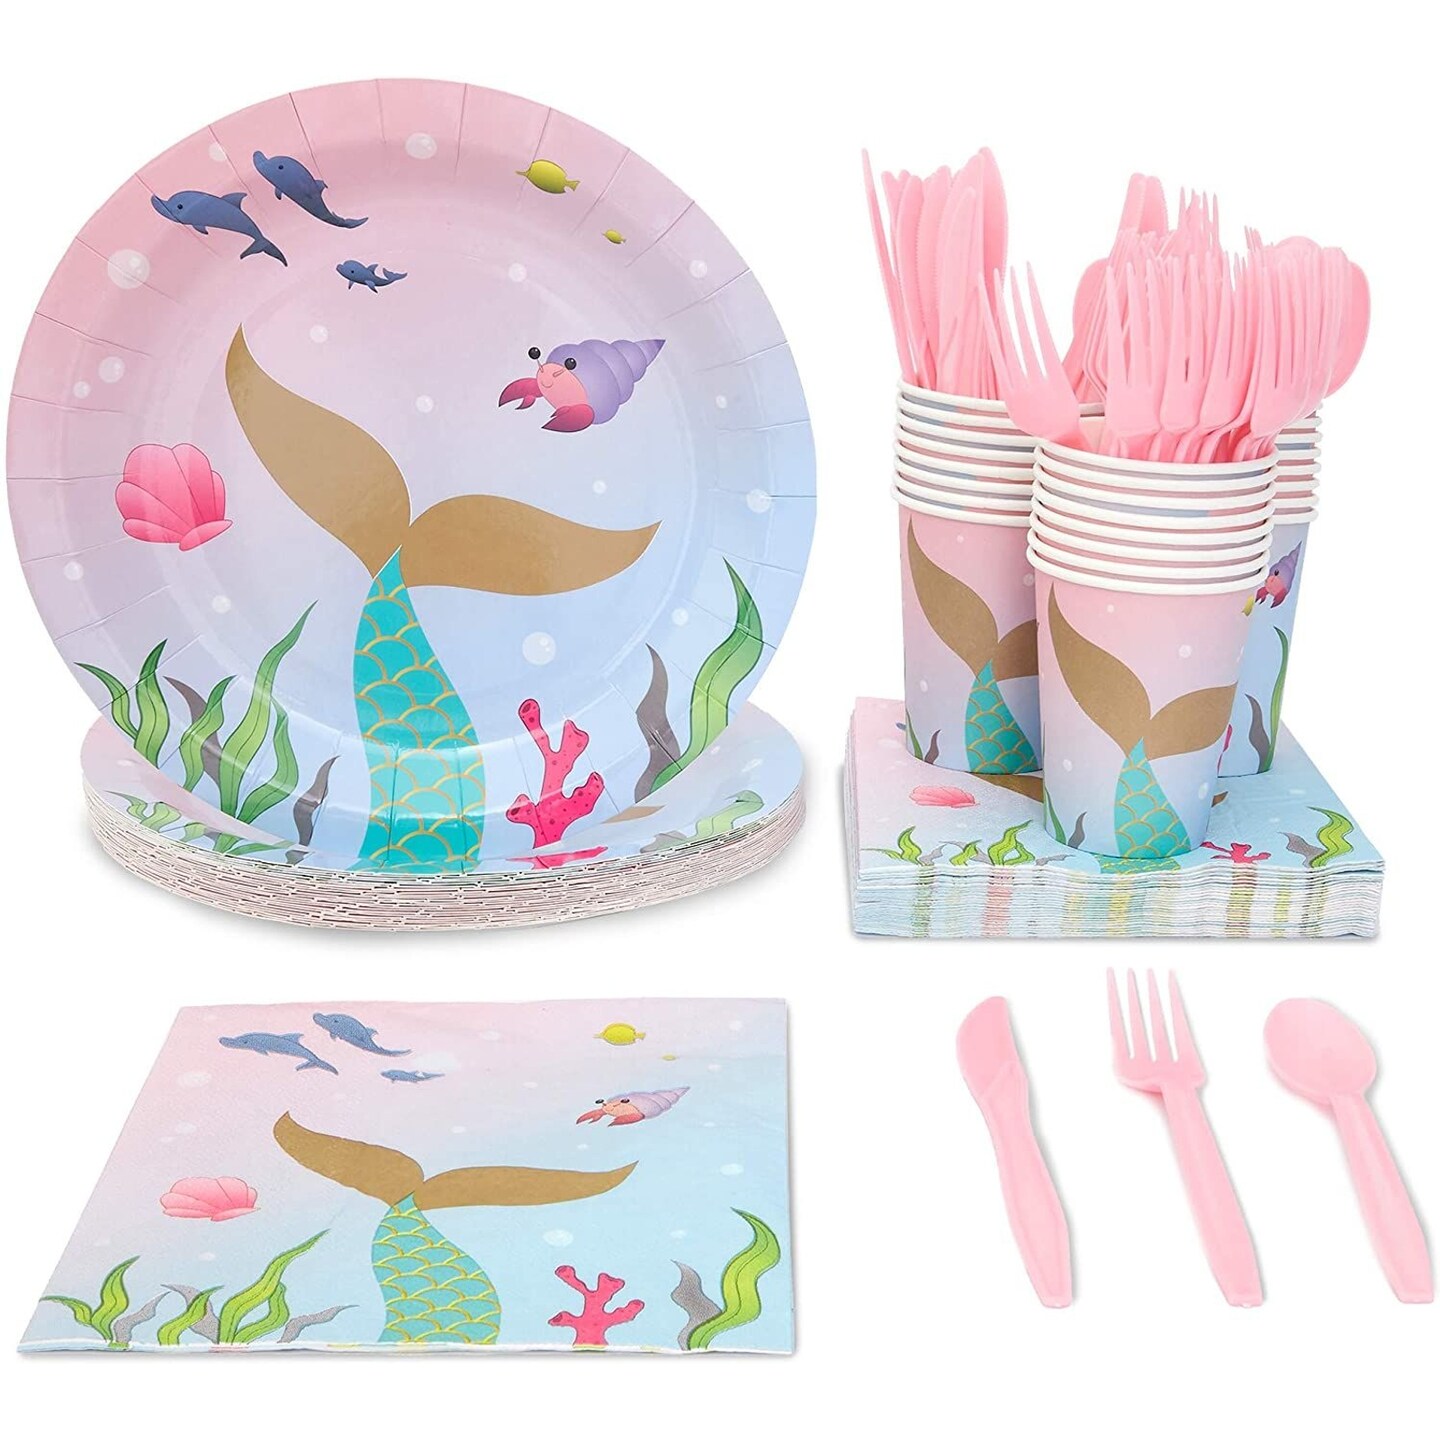 144 Pieces Mermaid Birthday Party Supplies, Dinnerware Set with Plates, Napkins, Cups, Cutlery (Serves 24)